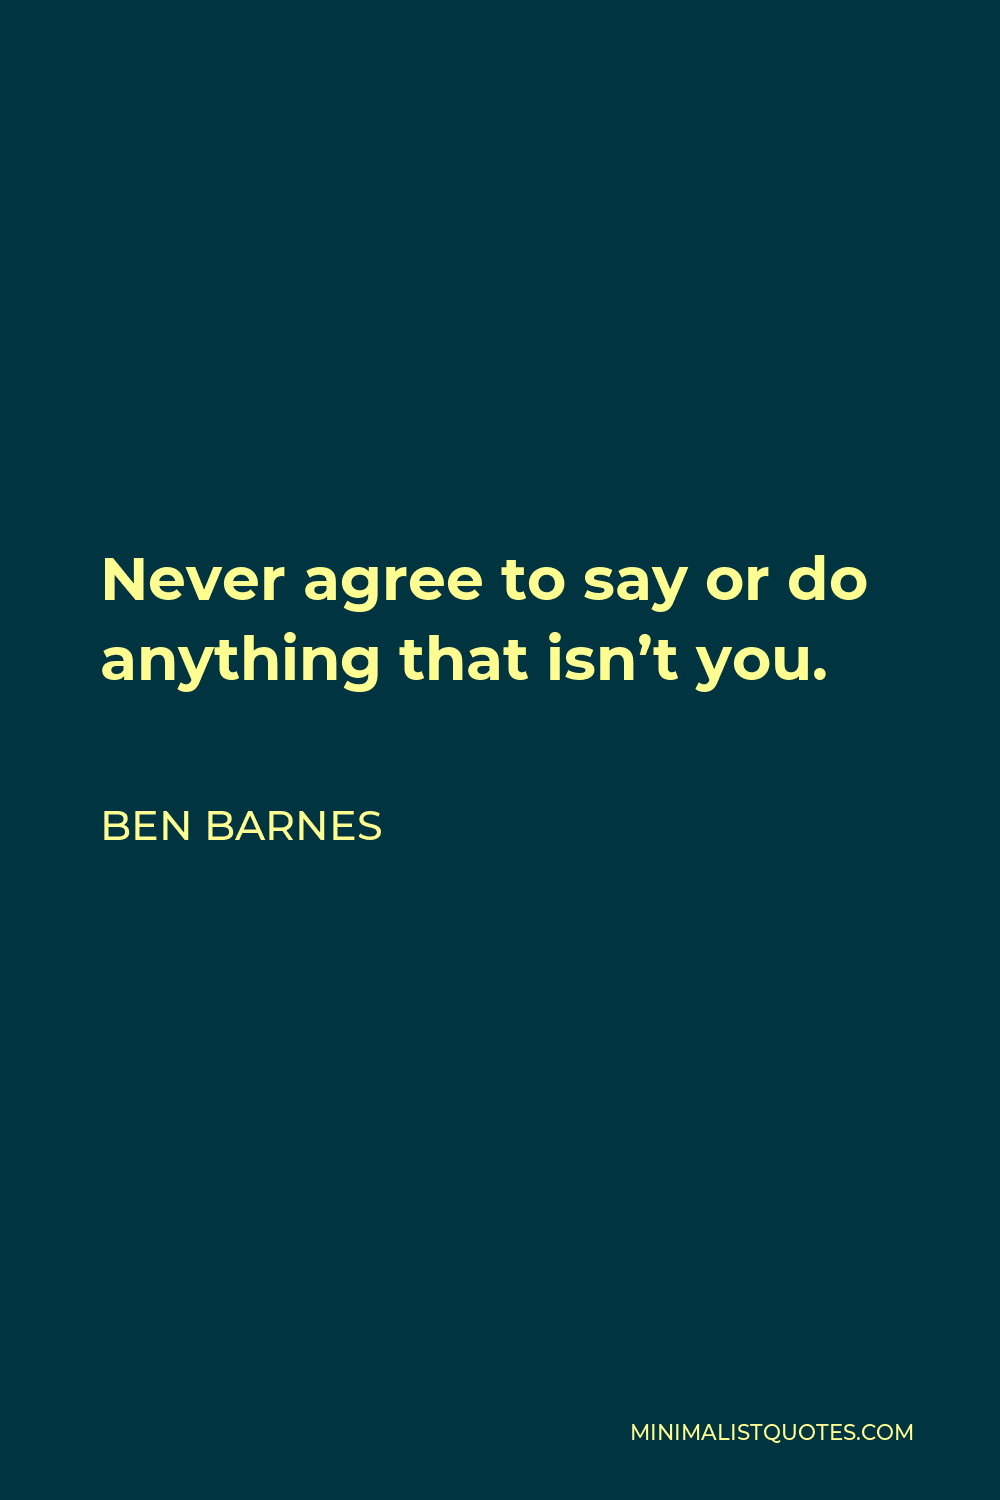 Ben Barnes Quote - Never agree to say or do anything that isn’t you.